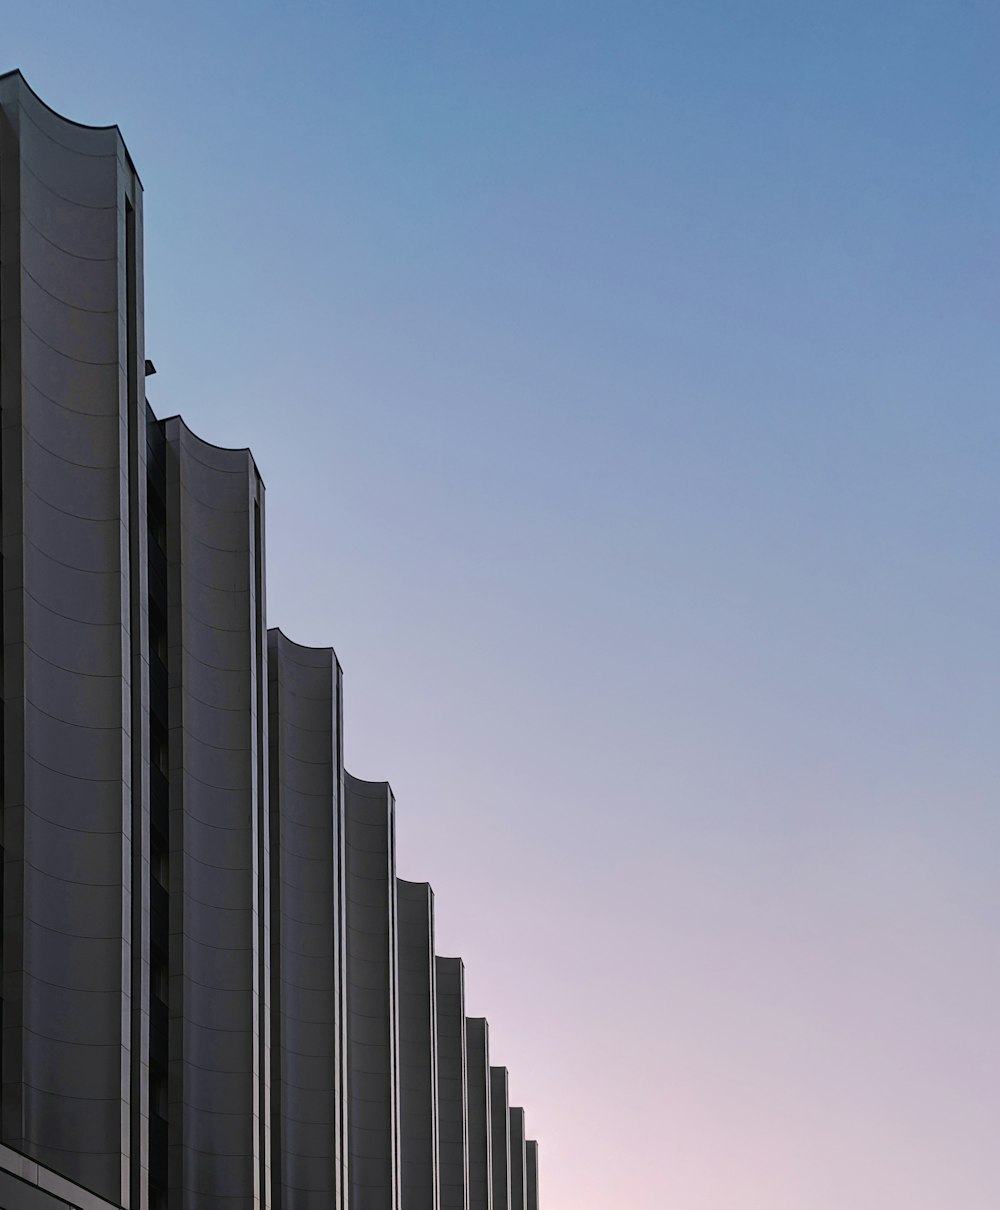 a row of tall buildings sitting next to each other